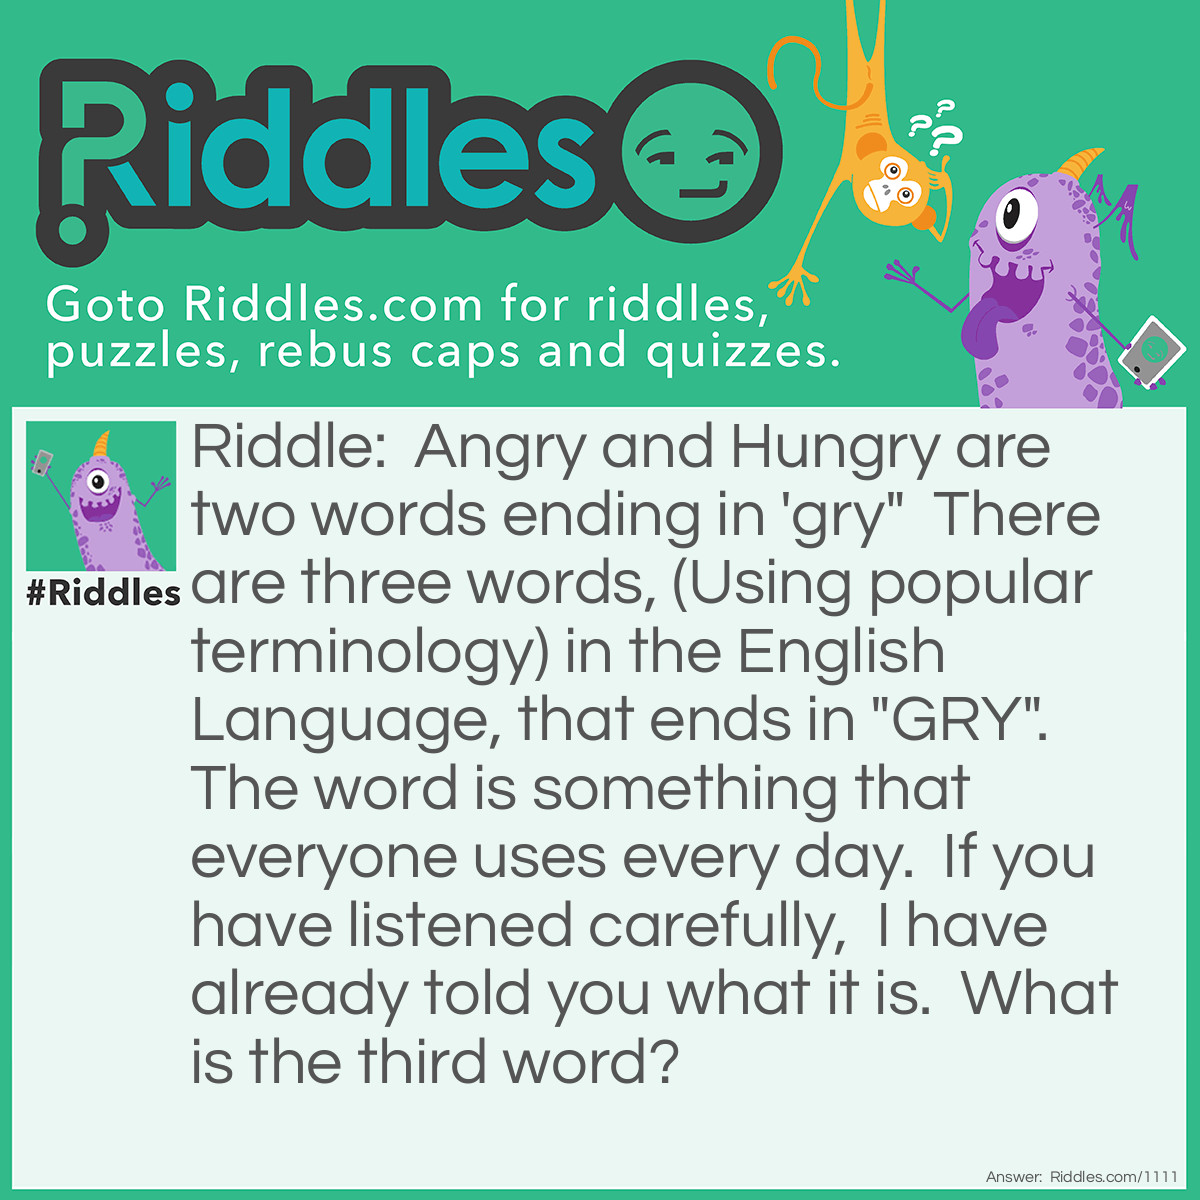 Riddle: Angry and Hungry are two words ending in 'gry"  There are three words, (Using popular terminology) in the English Language, that ends in "GRY".
The word is something that everyone uses every day.  If you have listened carefully,  I have already told you what it is.  What is the third word?  Answer: The answer is terminology. It's the third word ending in gry. Usin<strong>g</strong> popula<strong>r</strong> terminolog<strong>y</strong>